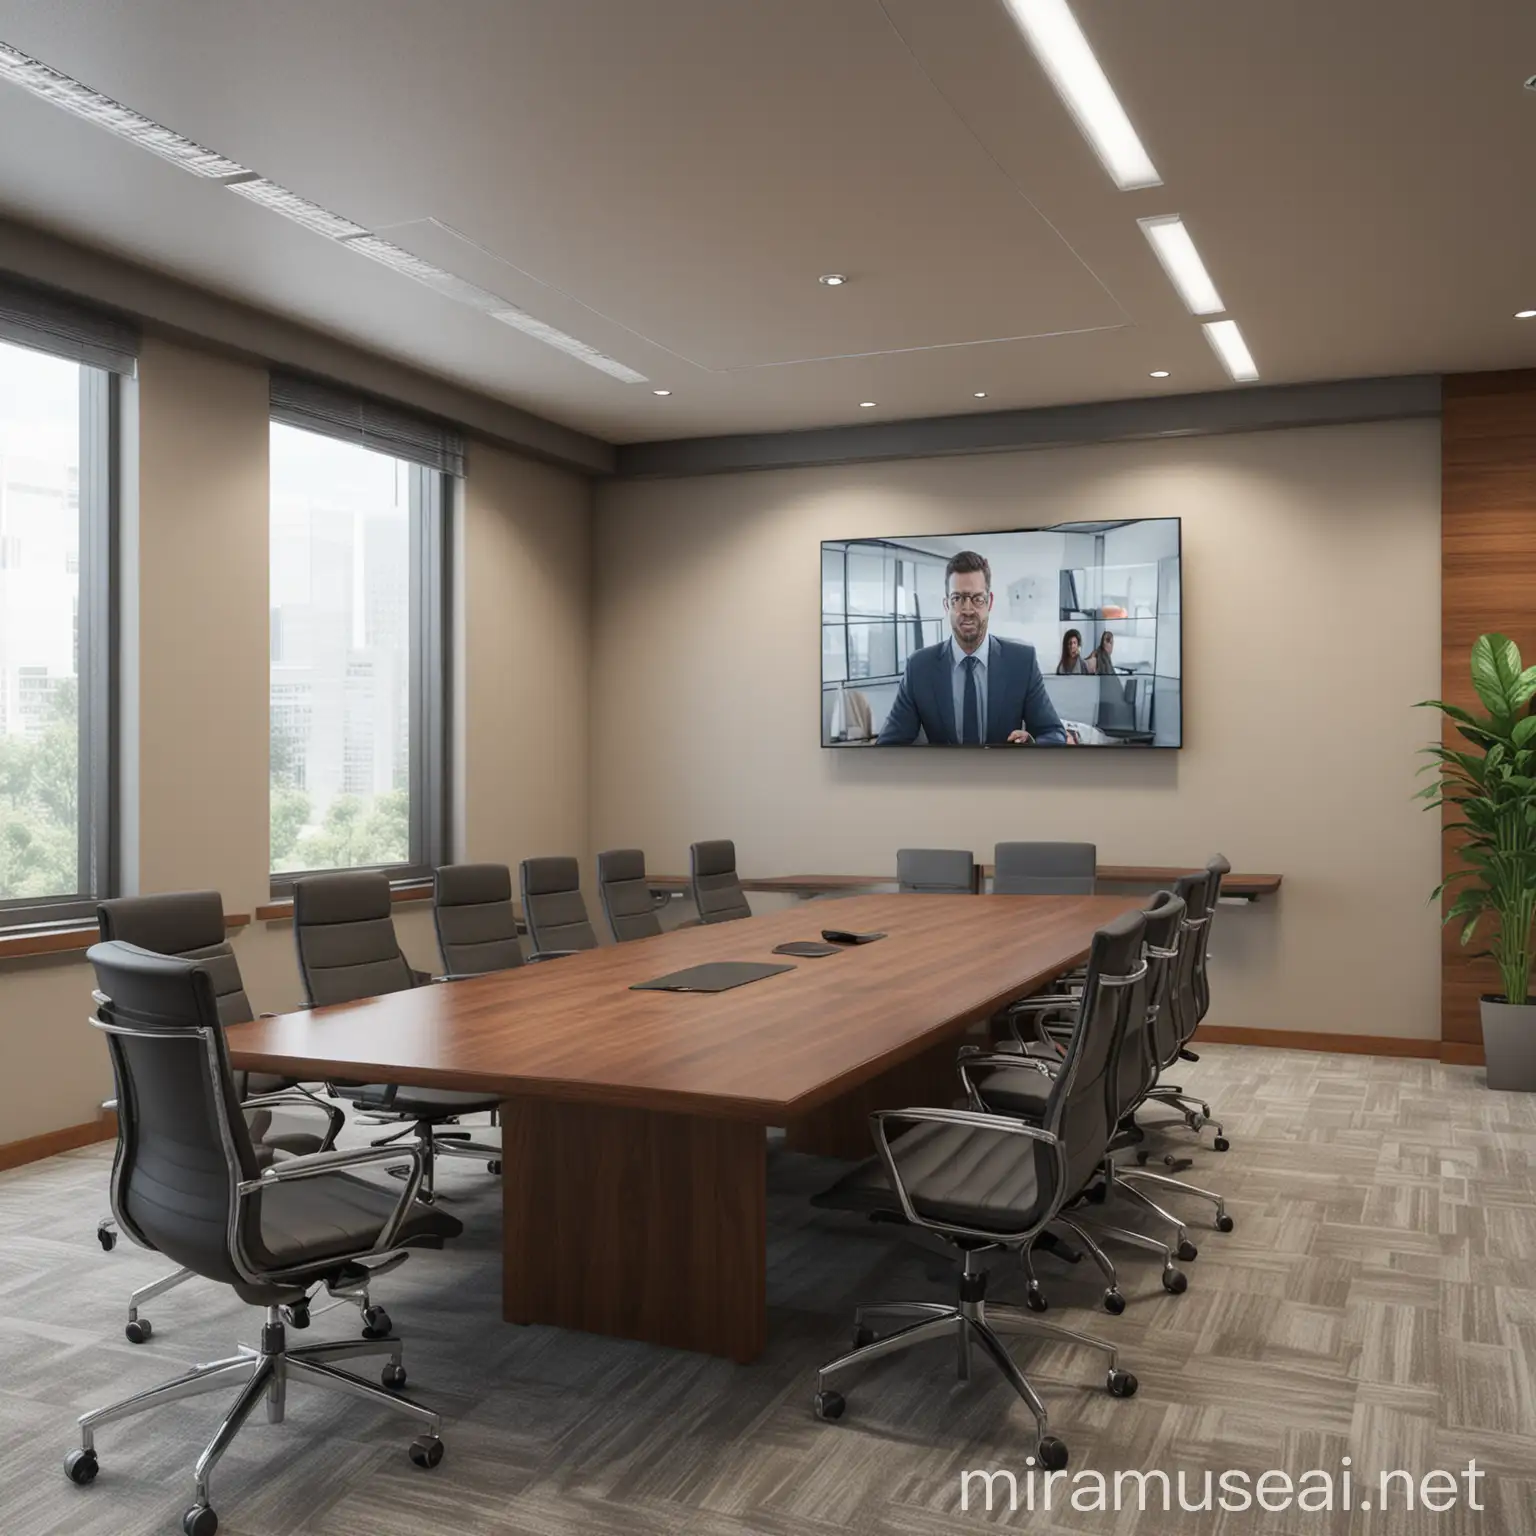 Empty Business Video Conference Room in Realistic Style